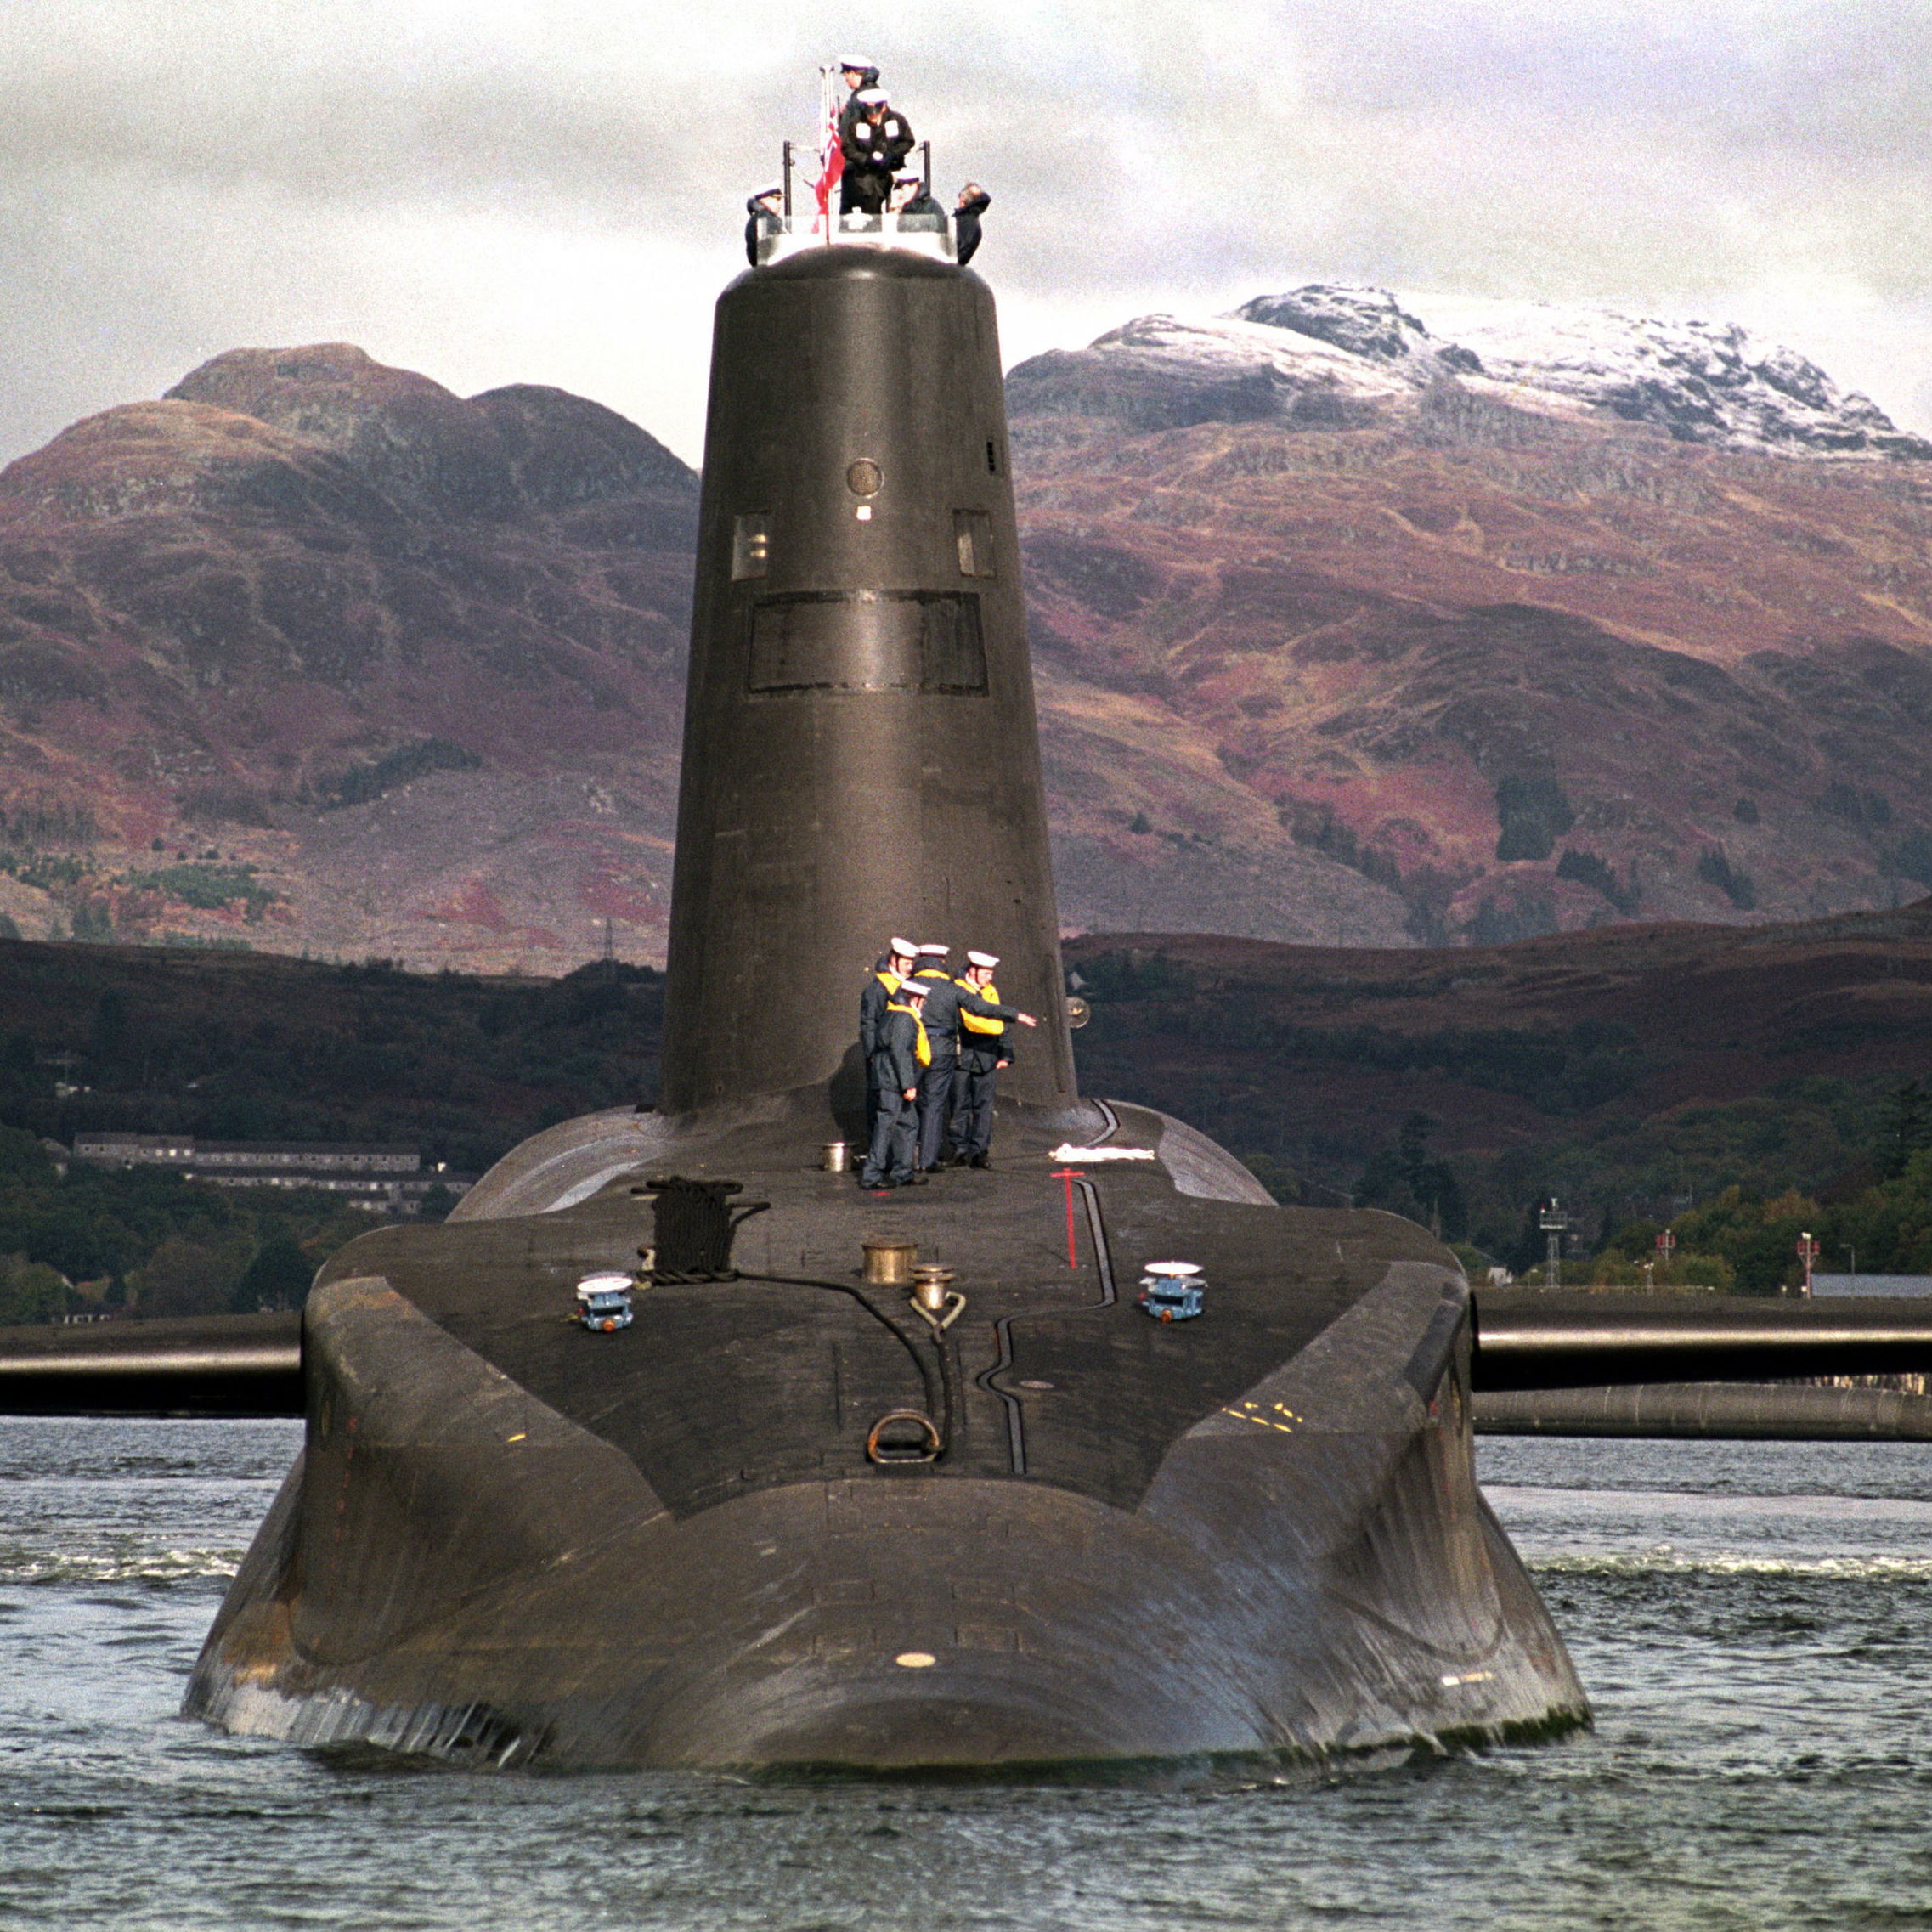 Scottish bishops call on Britain to scrap Trident weapons programme